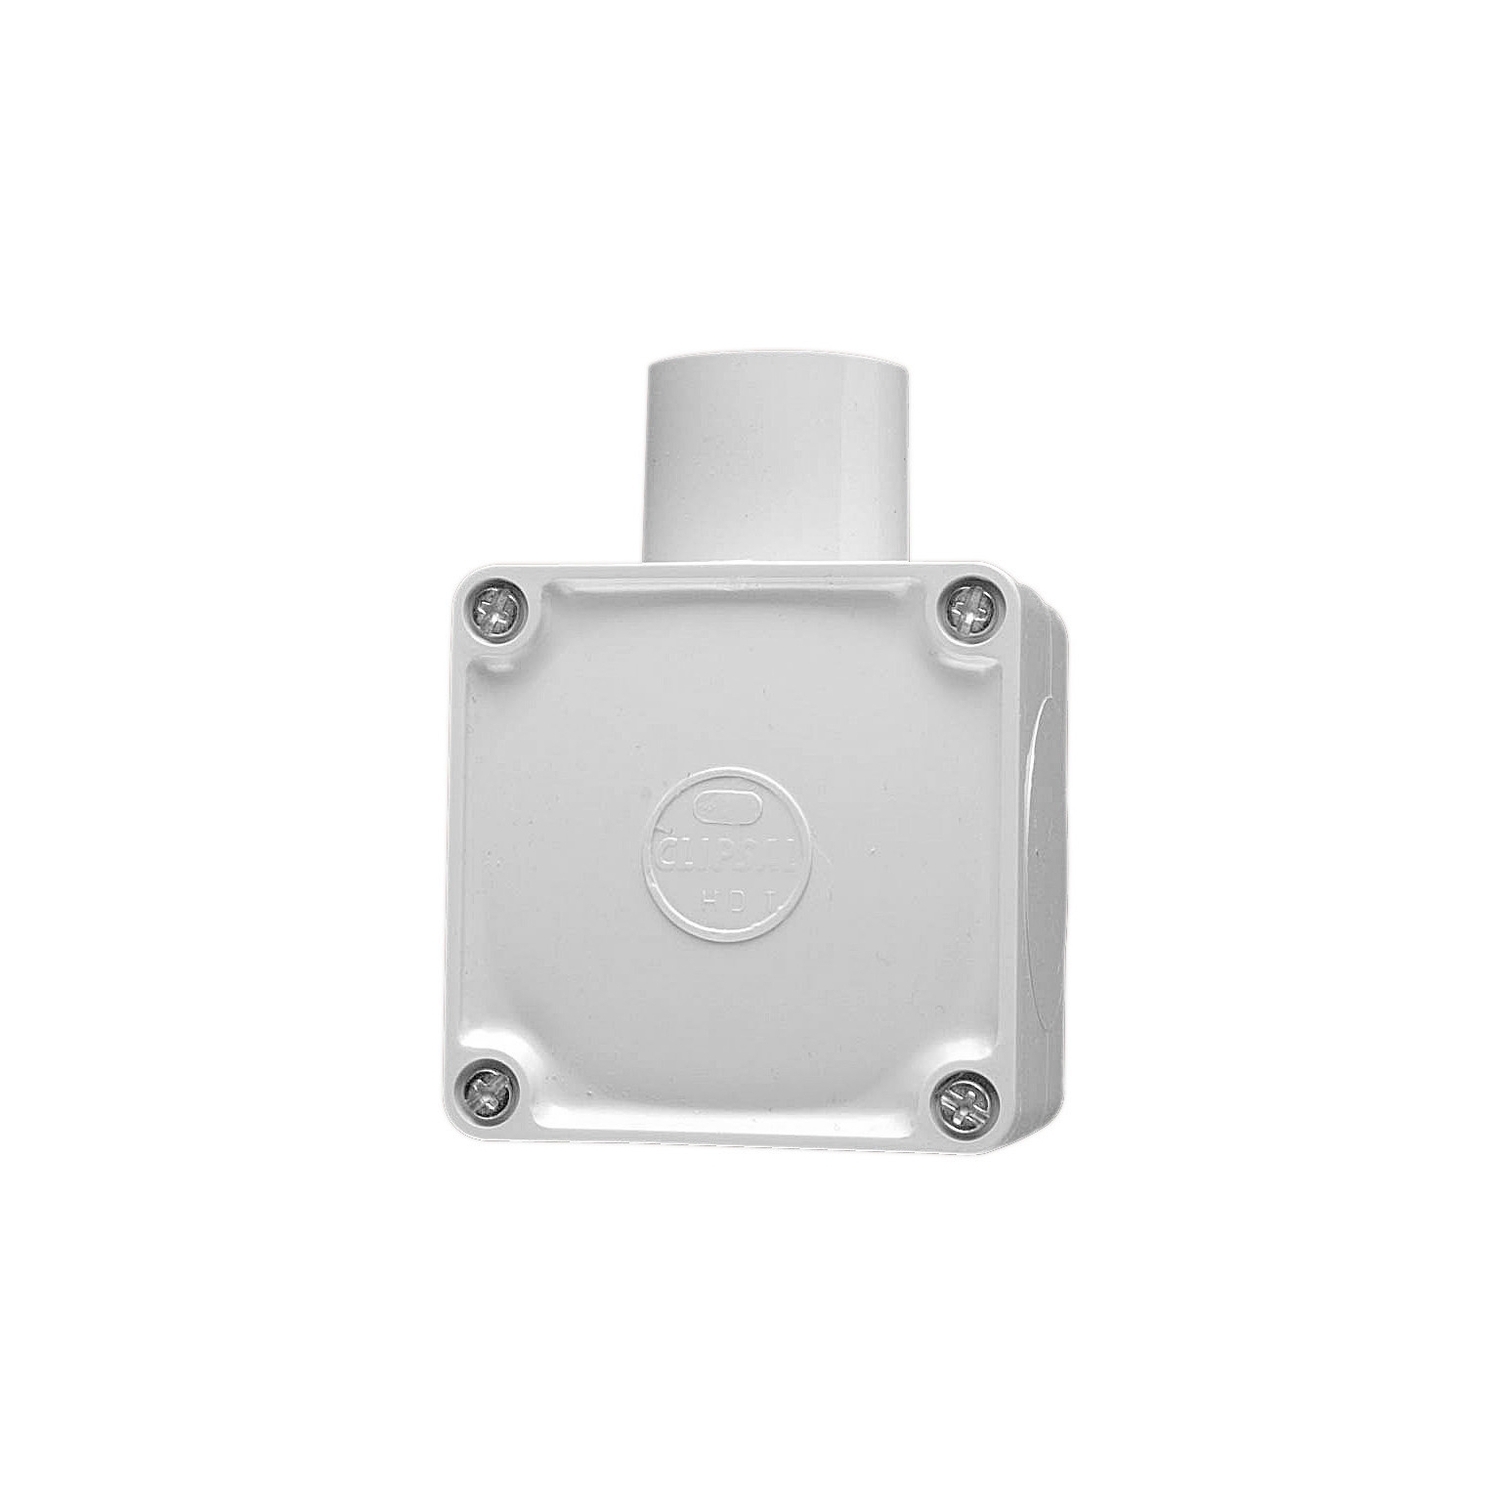 Square Junction Boxes, PVC, 32mm Entries, 1 Way, Grey